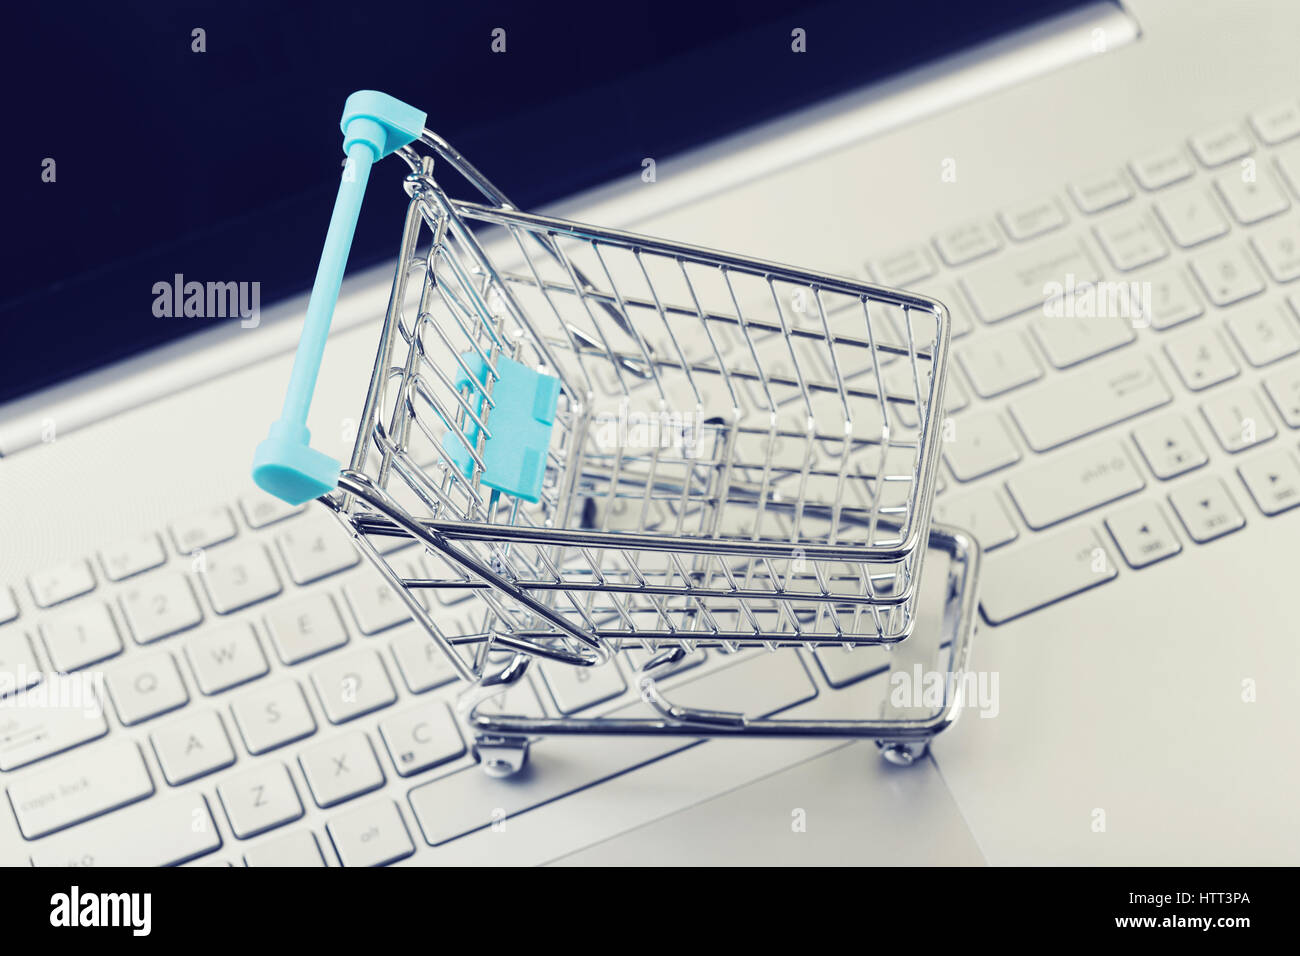 internet shopping concept - cart on computer keyboard Stock Photo